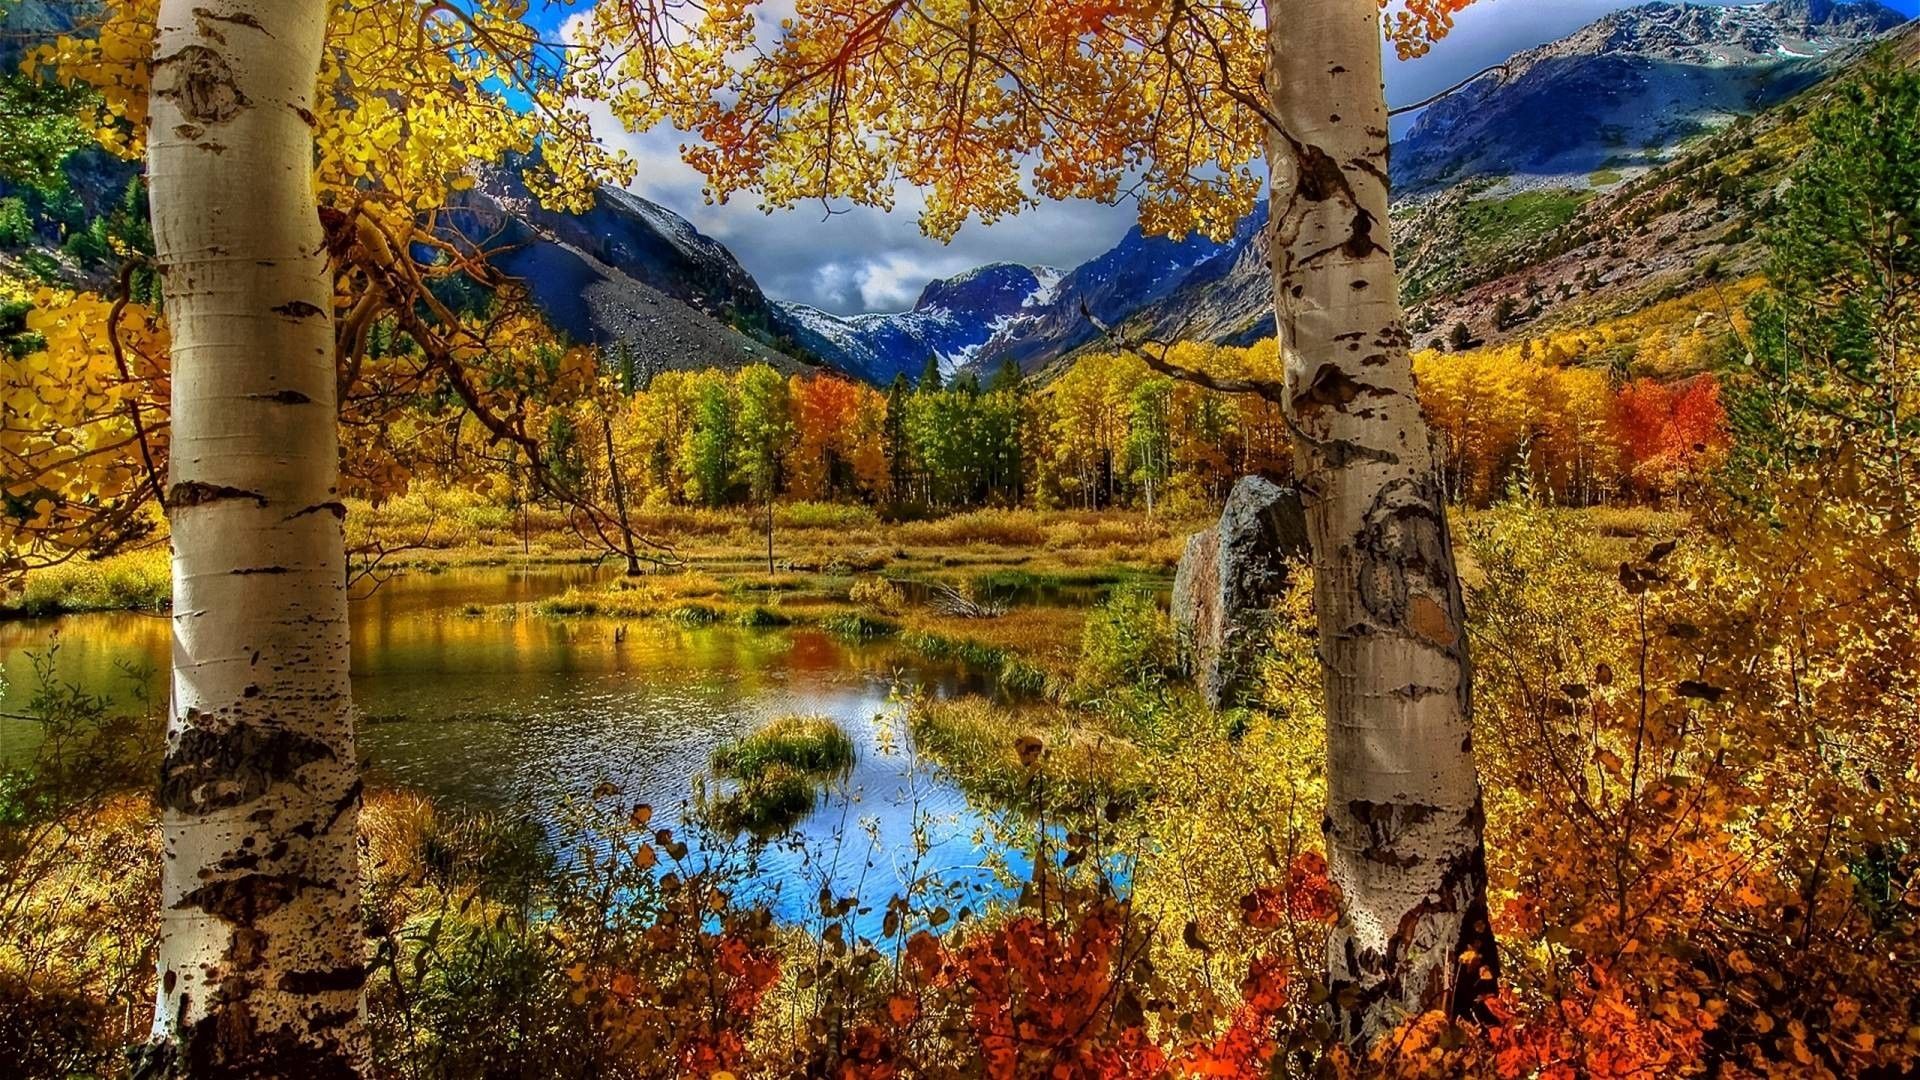 Free Computer Autumn Photo HD Background Photo Windows Artworks 4k High Definition Samsung Wallpaper Wallpaper For iPhone Free 1920x1080